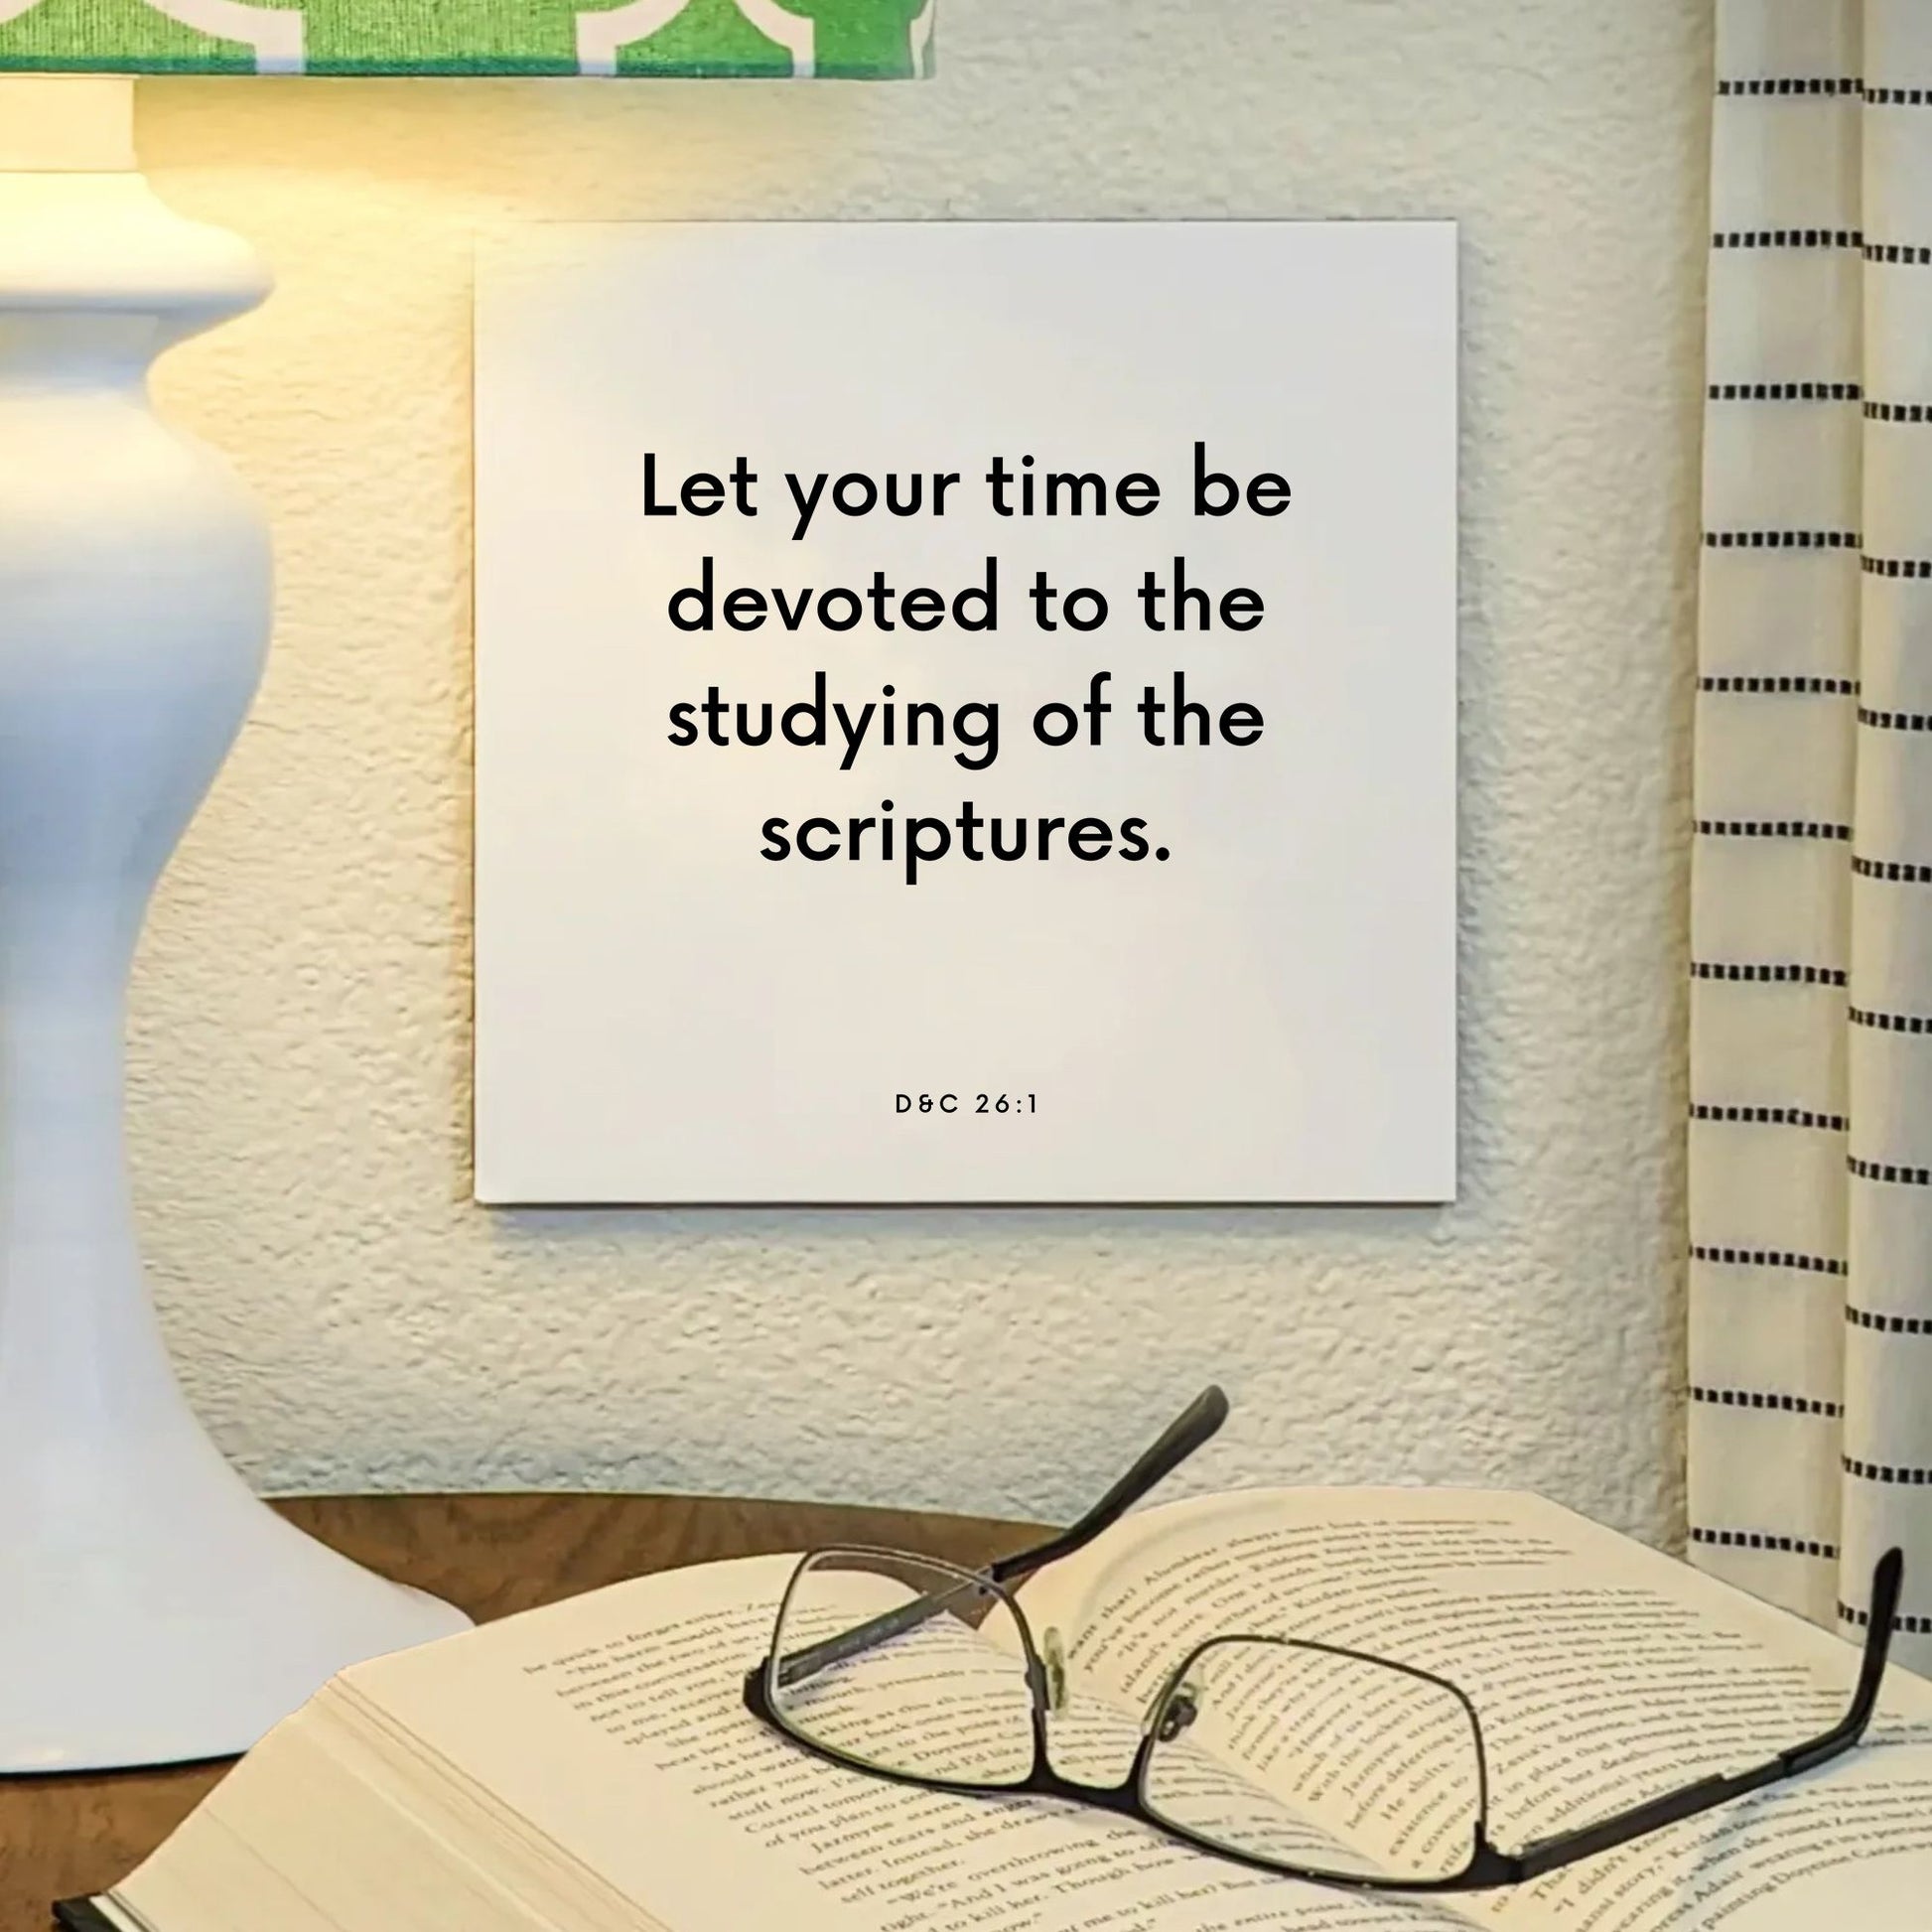 Lamp mouting of the scripture tile for D&C 26:1 - "Let your time be devoted to the studying of the scriptures"